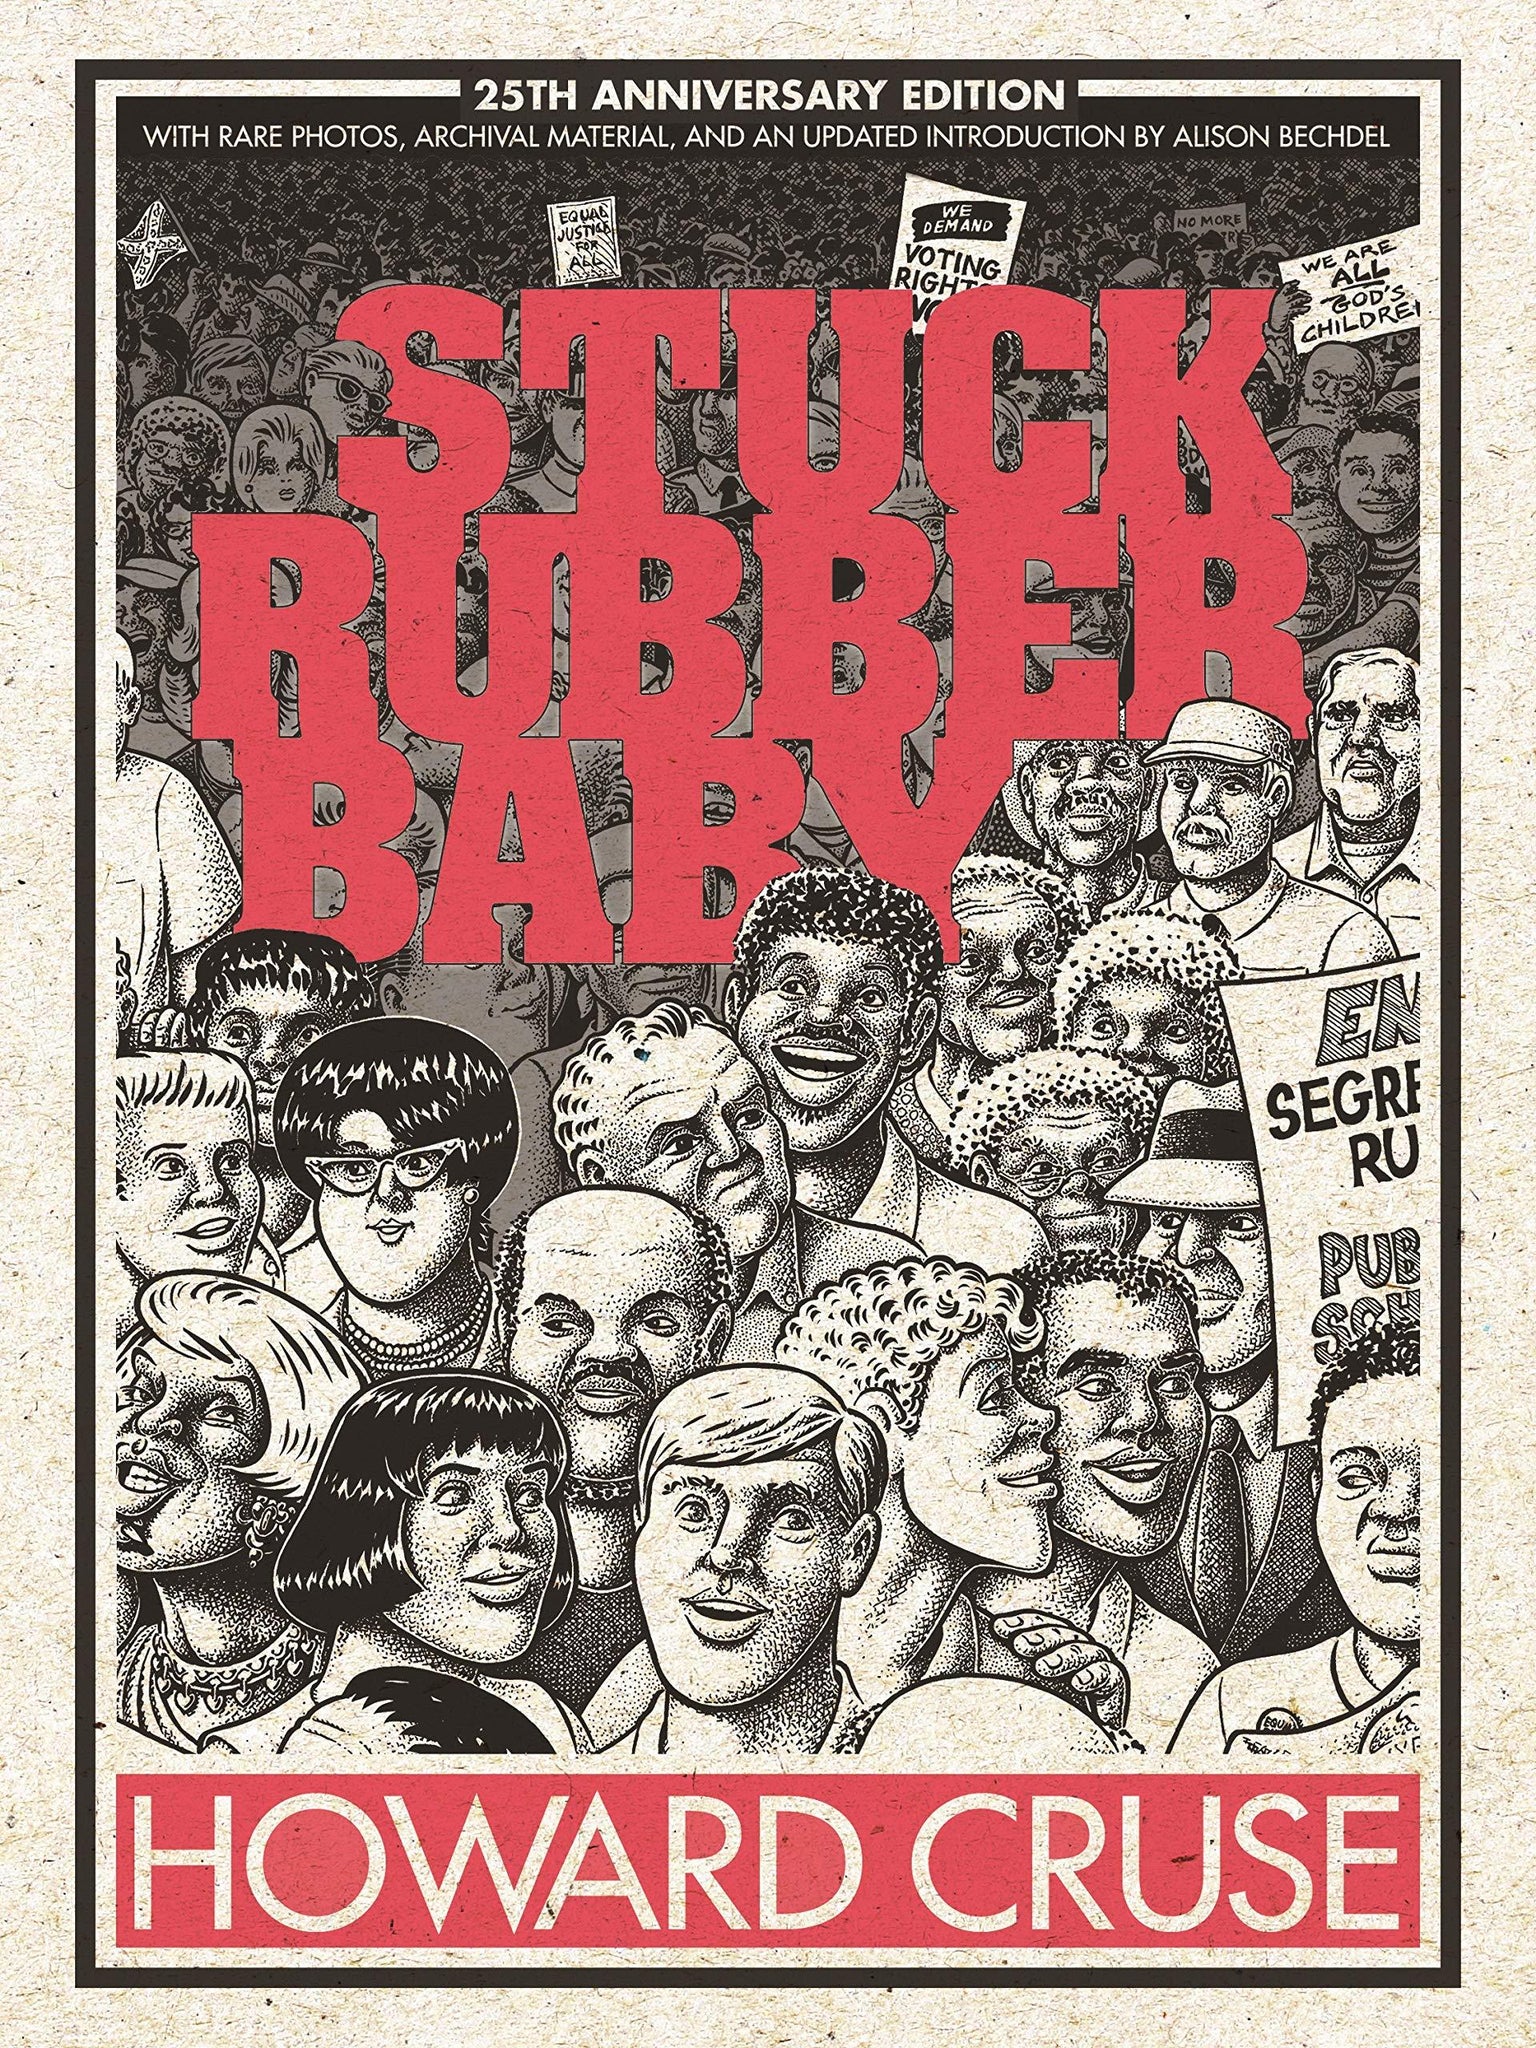 Stuck Rubber Baby 25th Anniversary Edition - ShopQueer.co